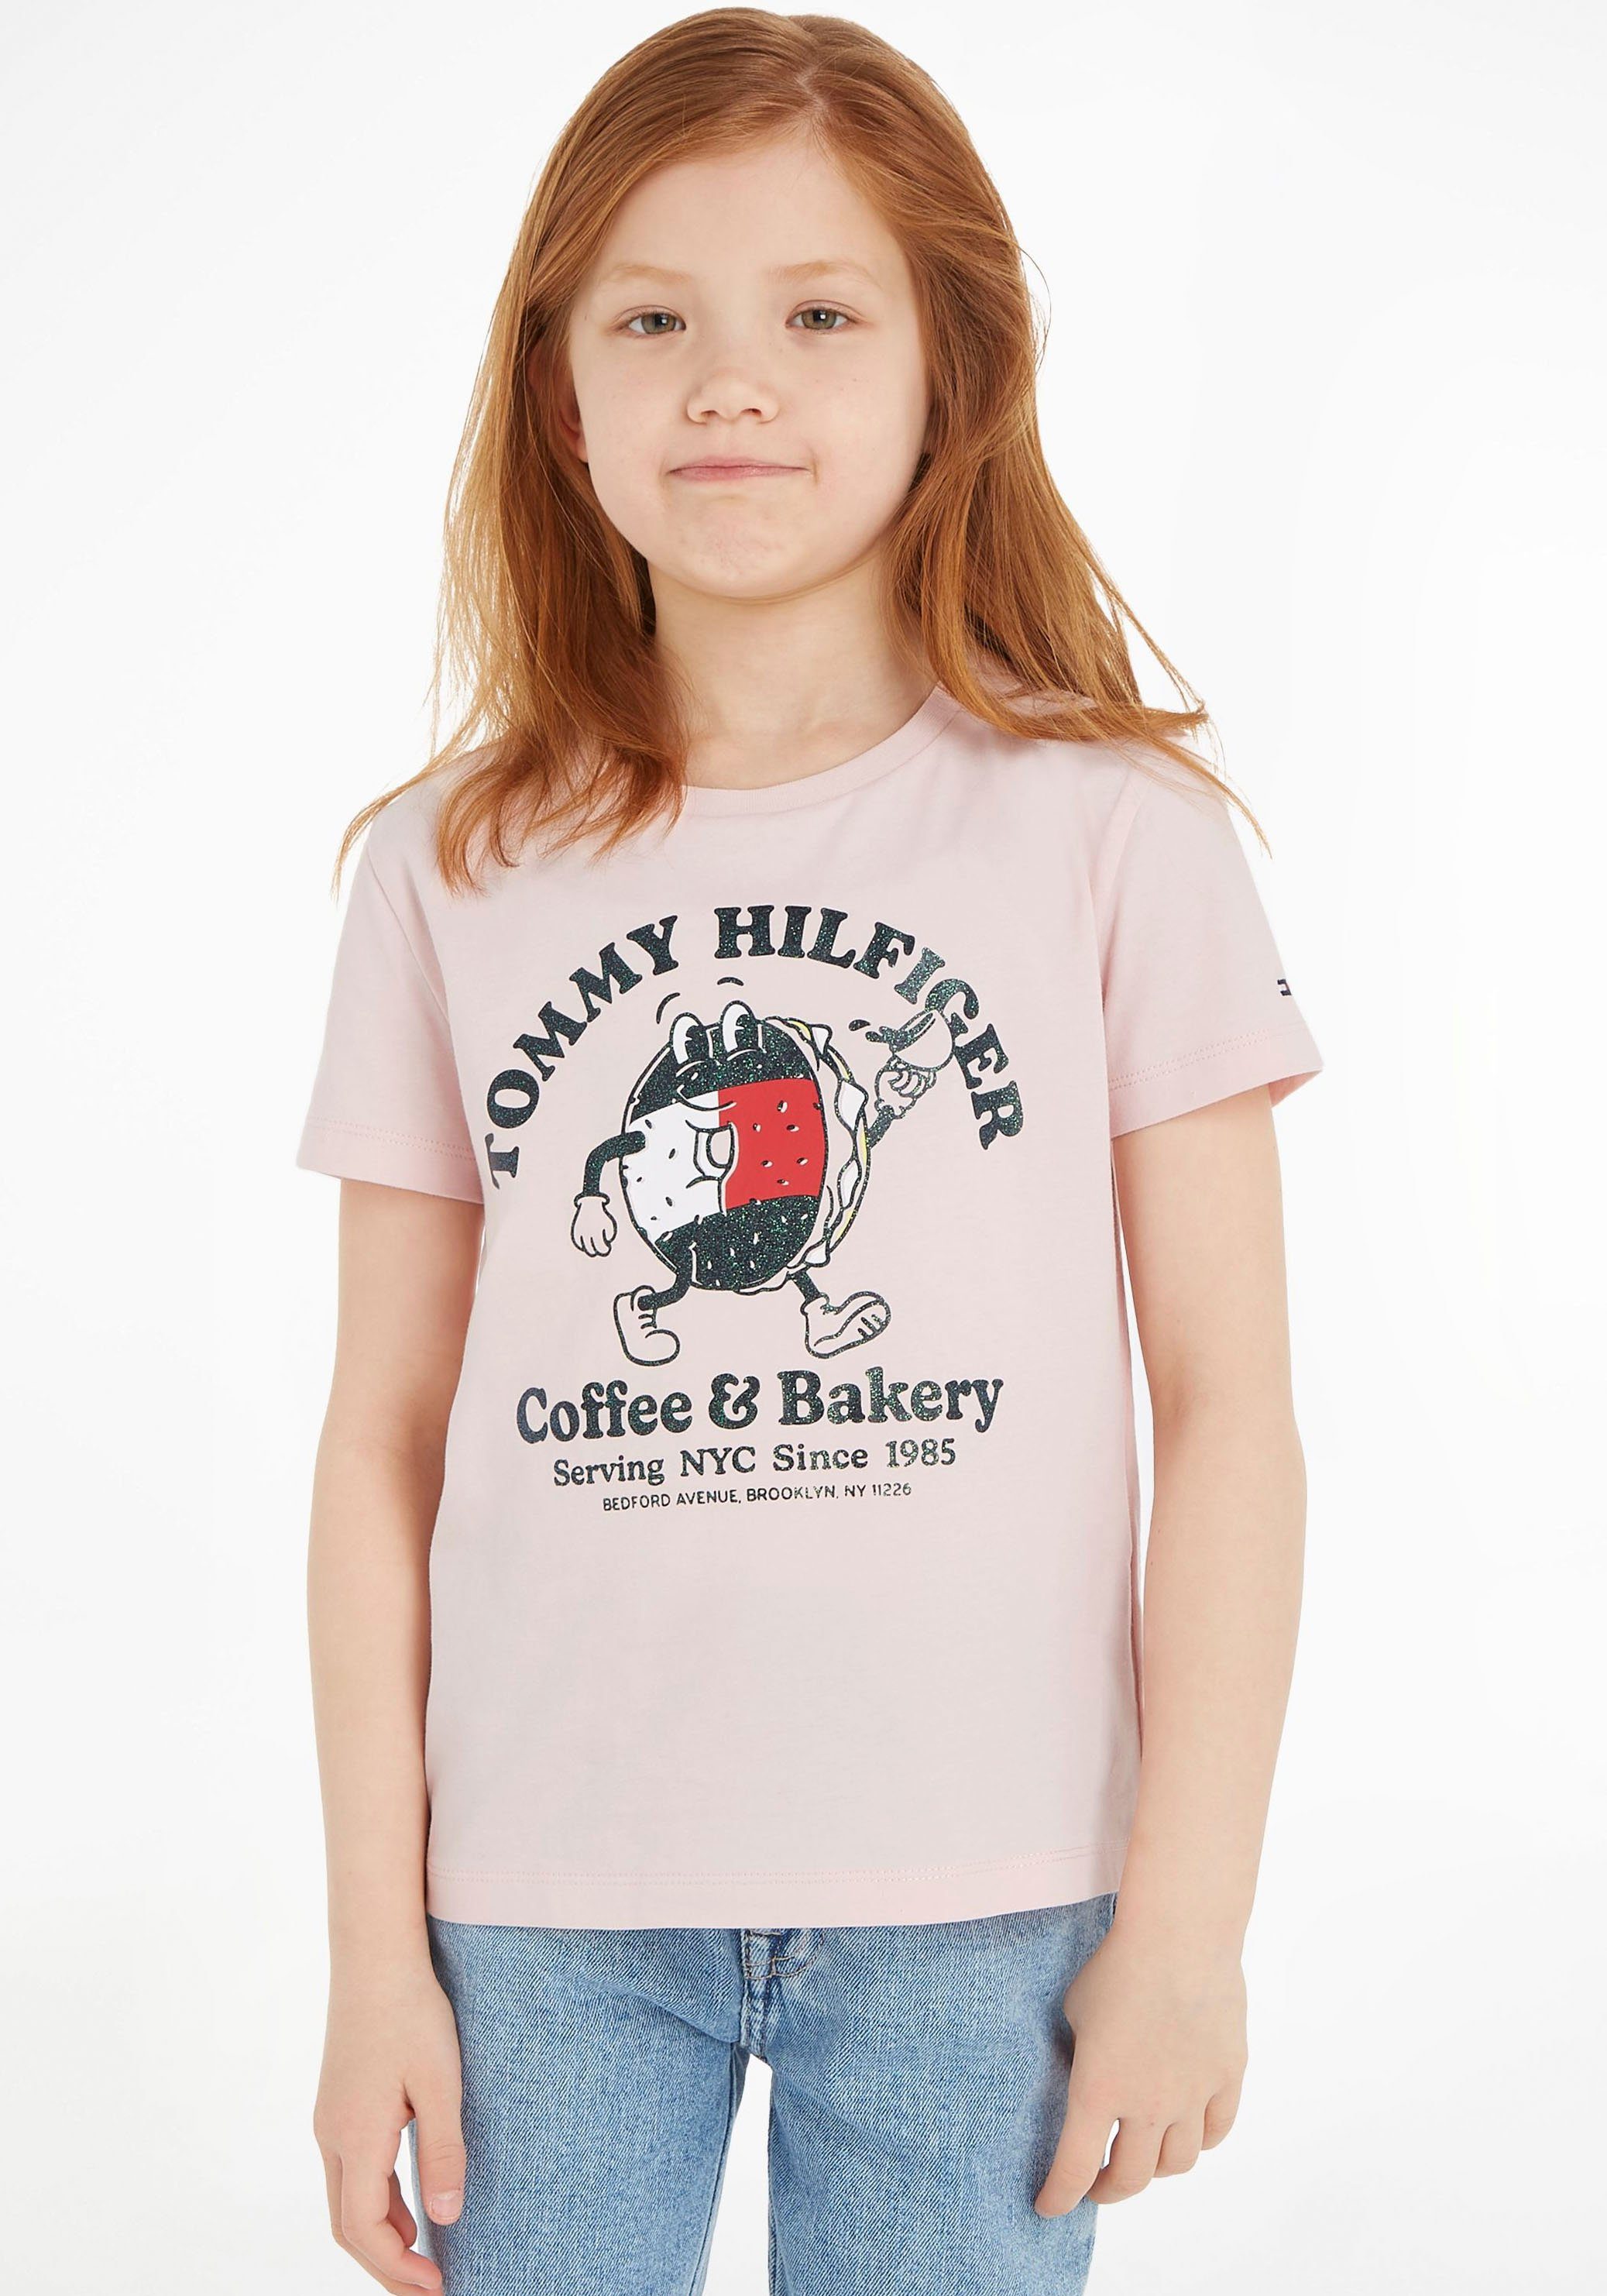 großem BAGELS Hilfiger TEE T-Shirt Whimsy Tommy S/S Druck Pink mit TOMMY